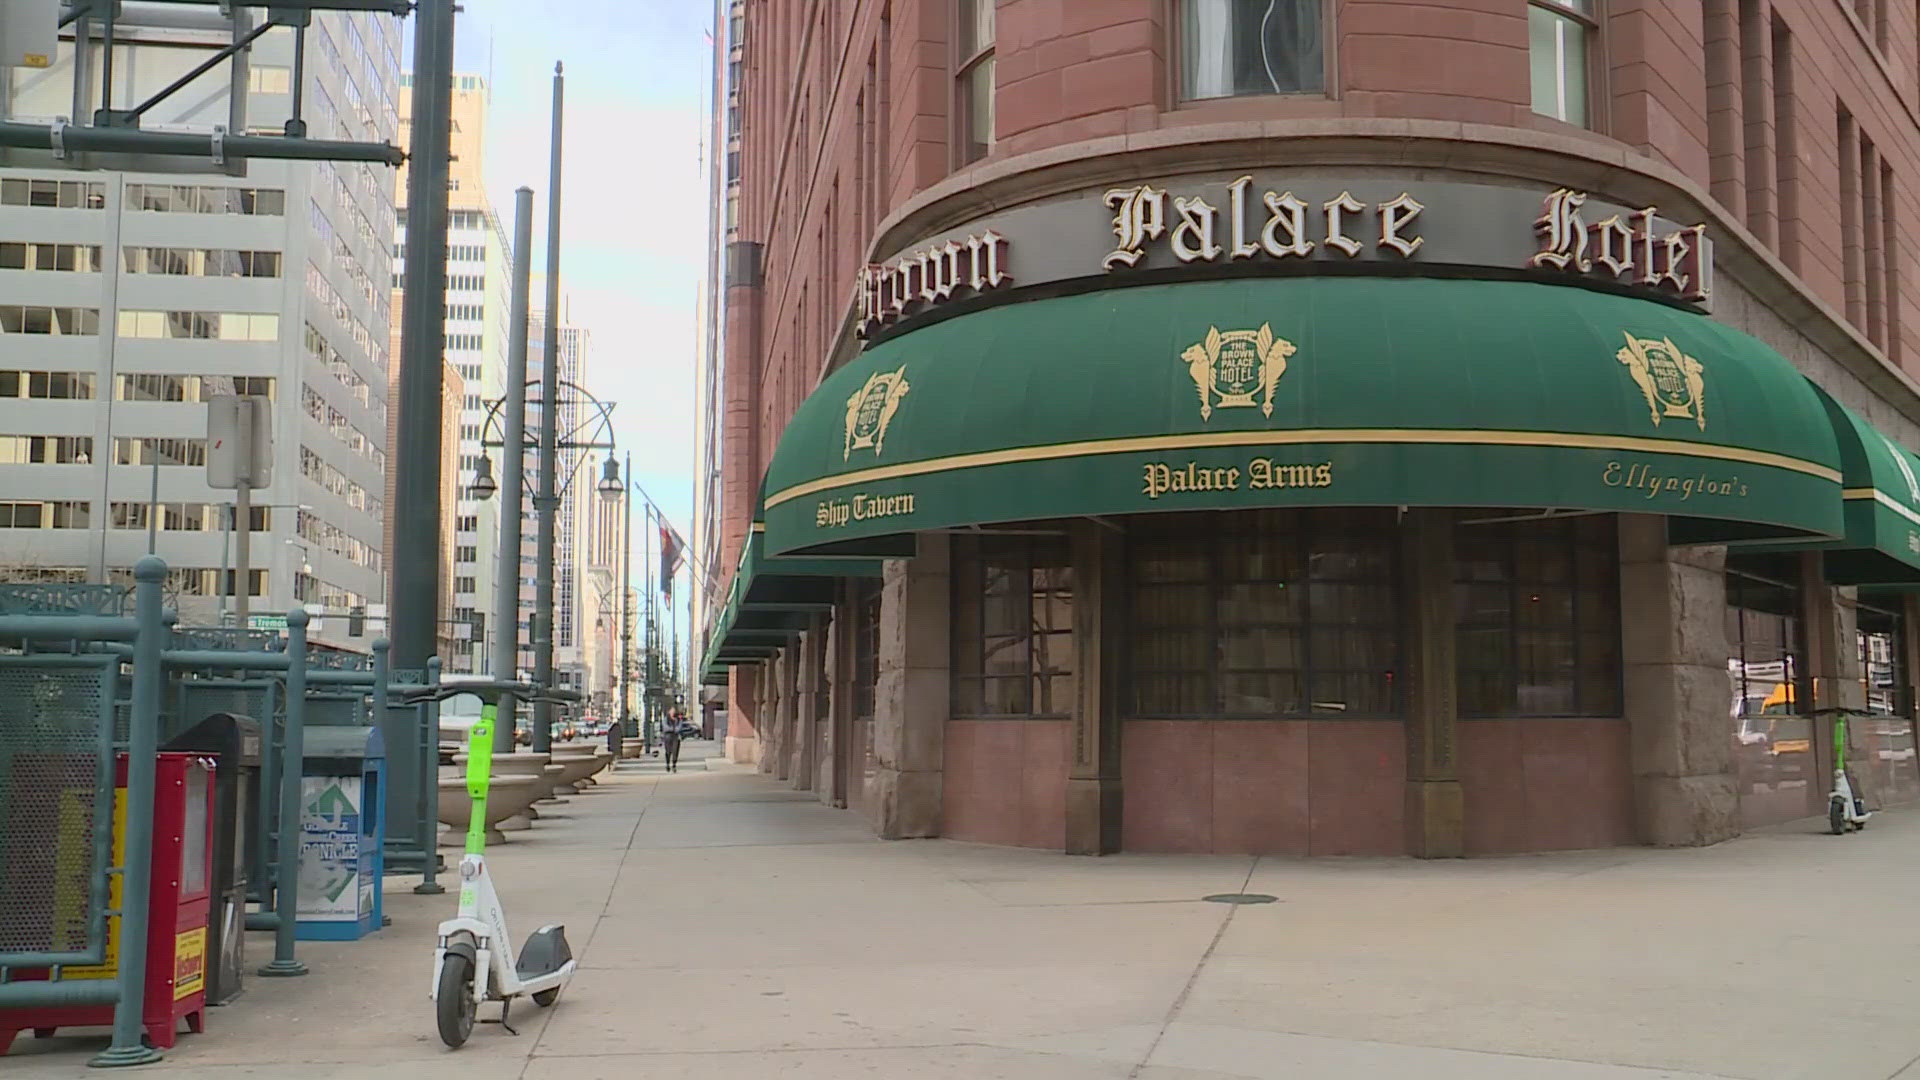 The Palace Arms restaurant located inside The Brown Palace in Denver, Colorado, is closing one of its restaurants.